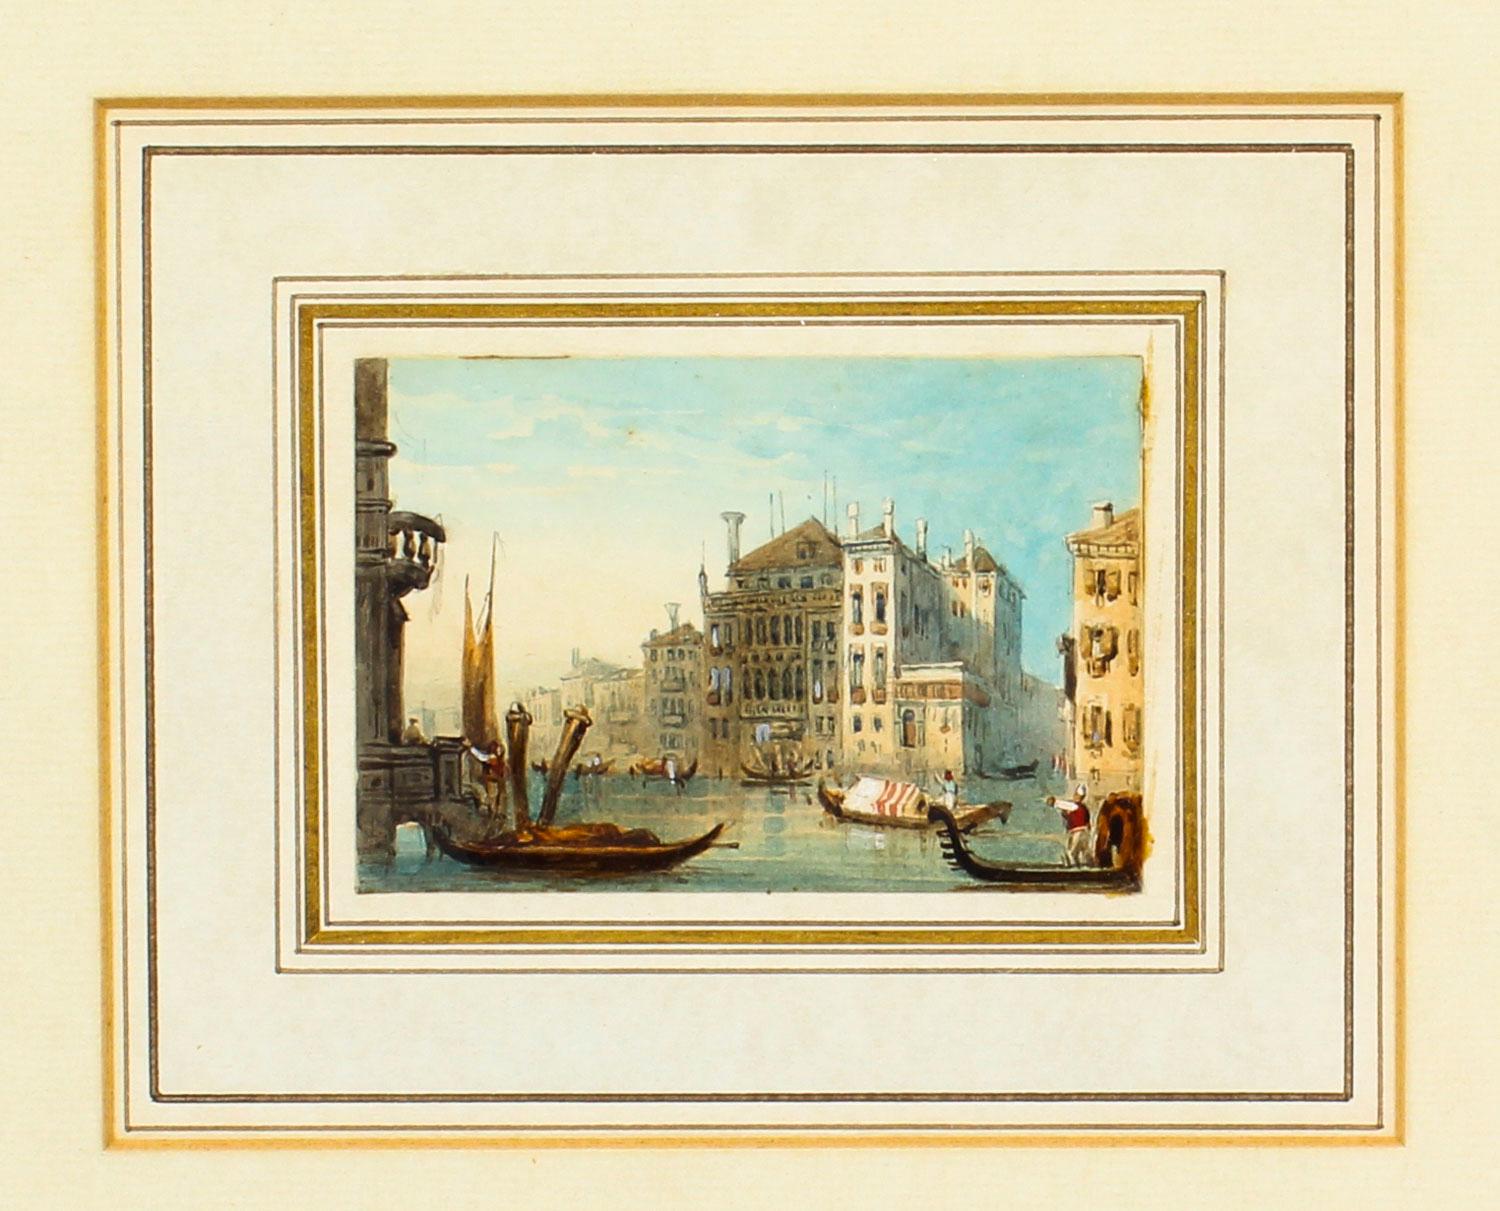 British Antique Pair of Miniature Watercolors by Samuel Prout, Early 19th Century